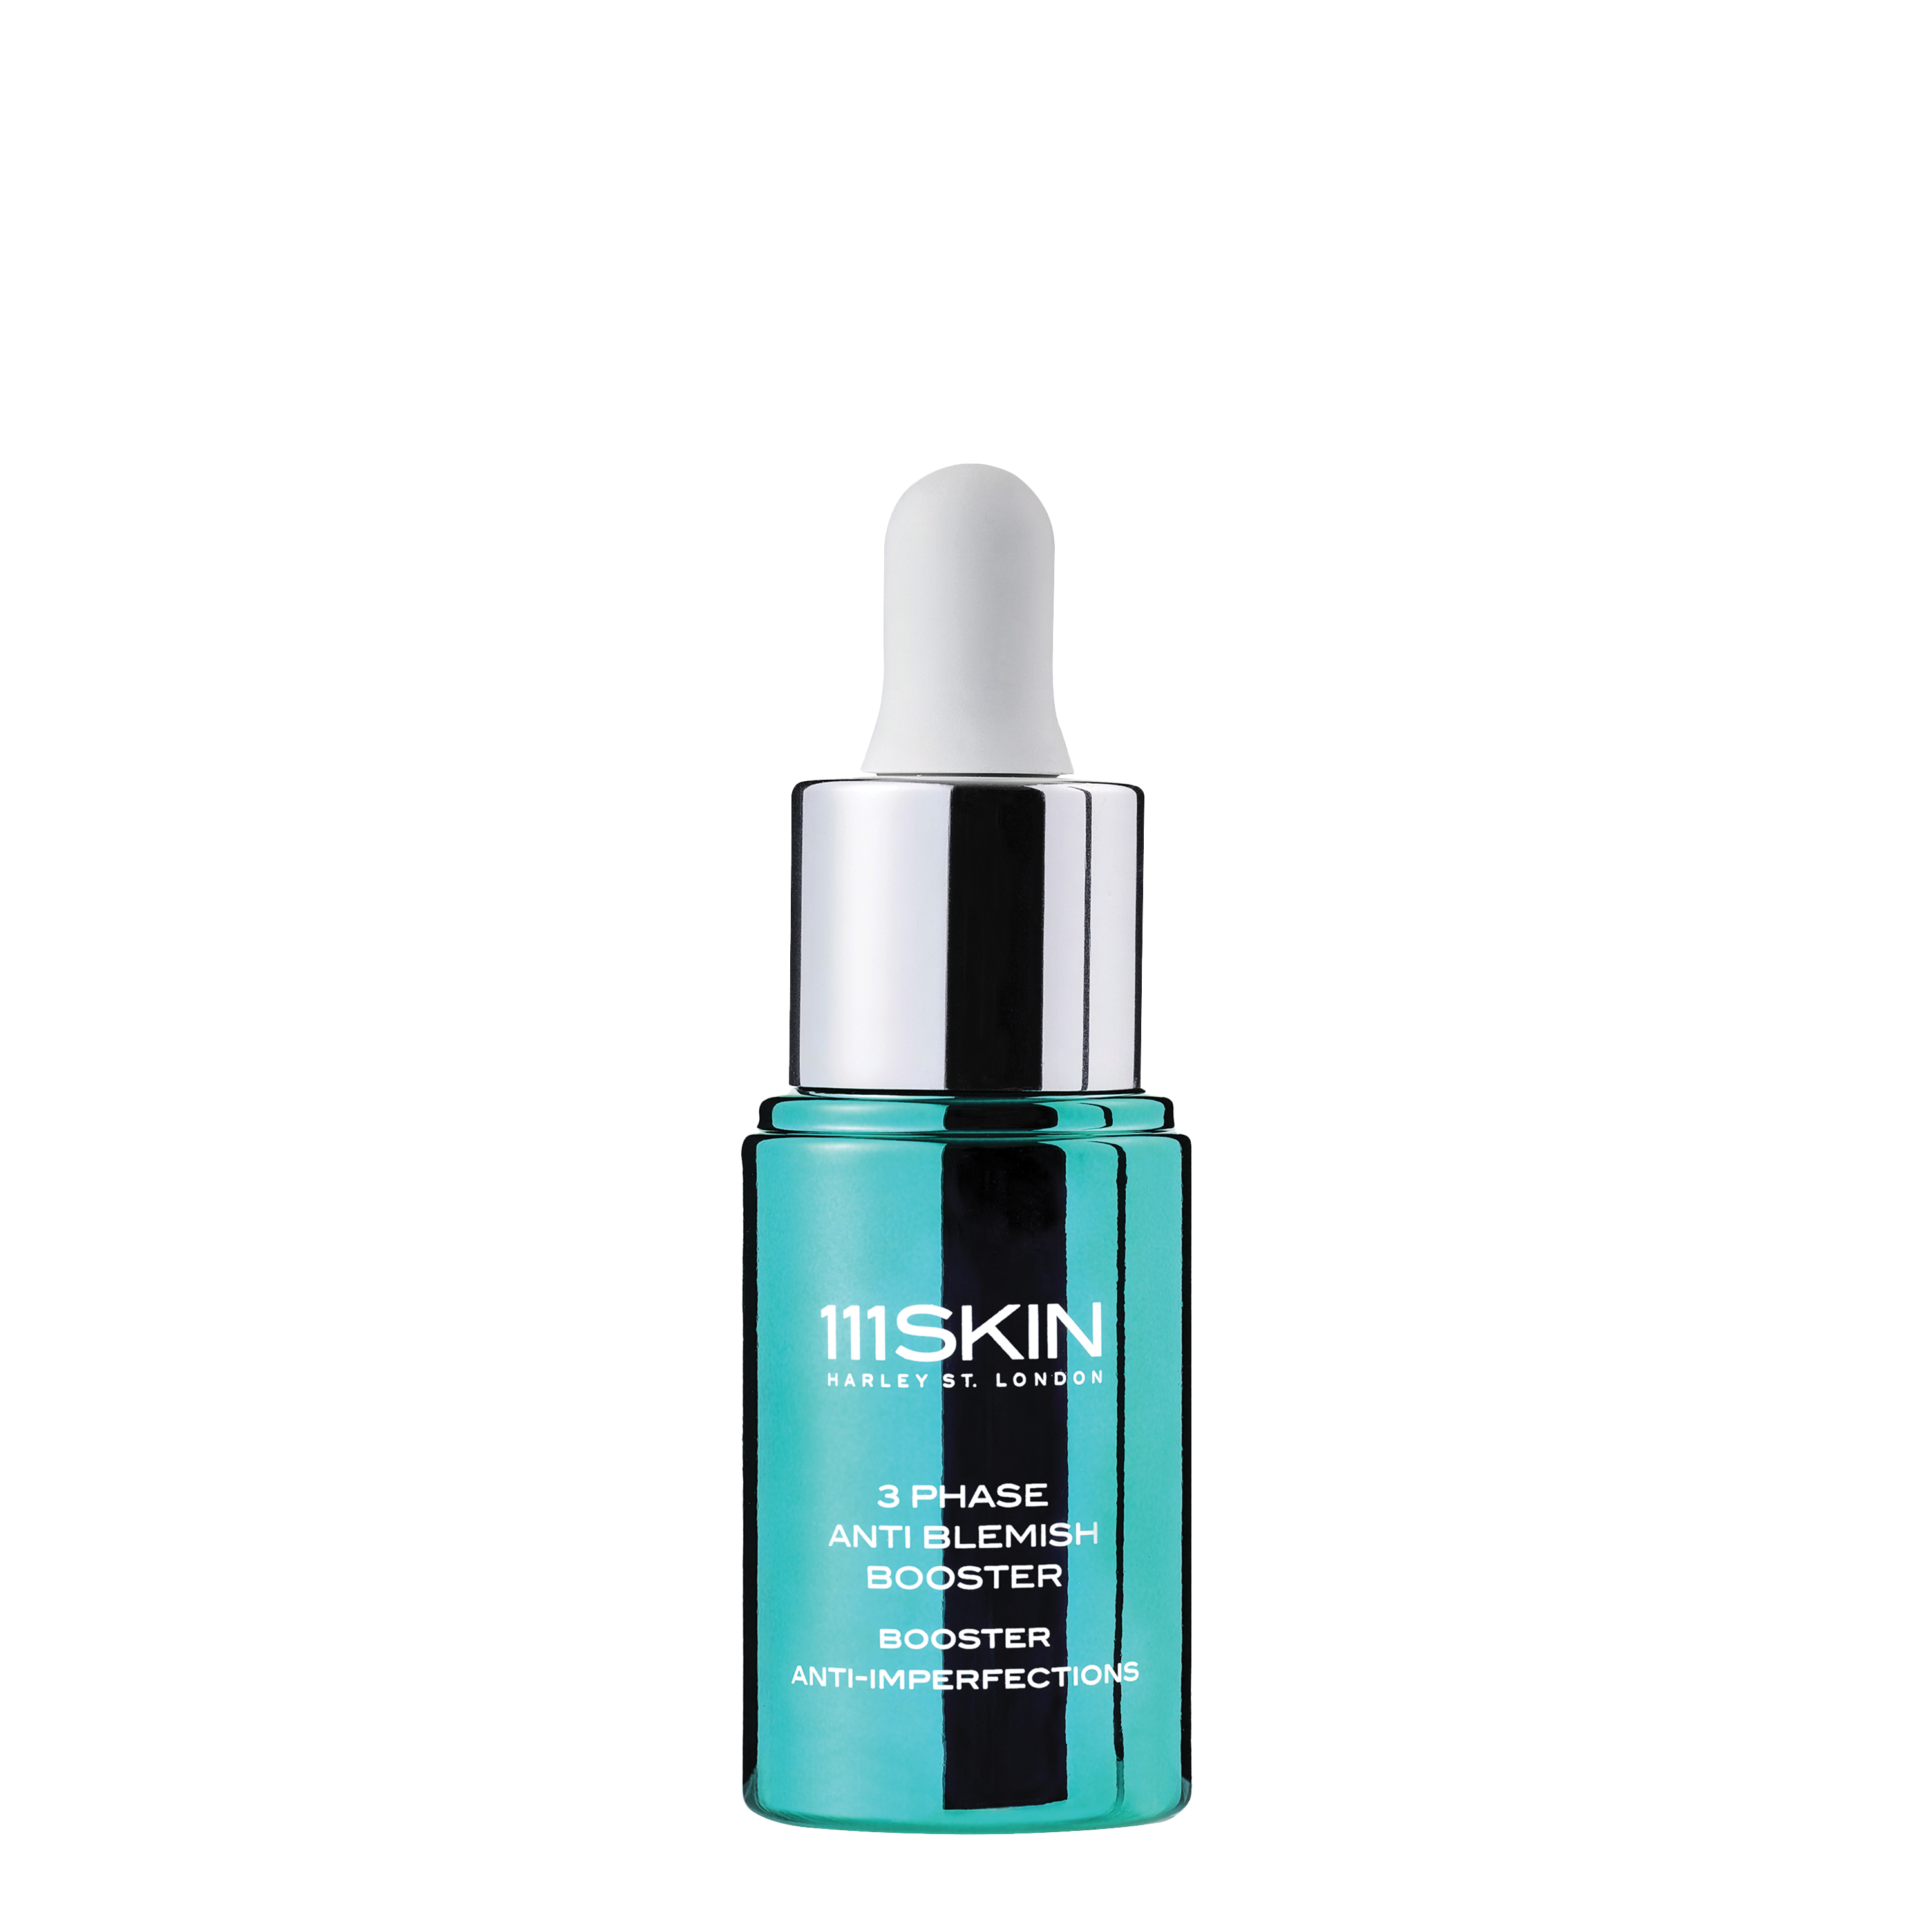 Load image into Gallery viewer, 111SKIN 3 Phase Anti-Blemish Booster Serum
